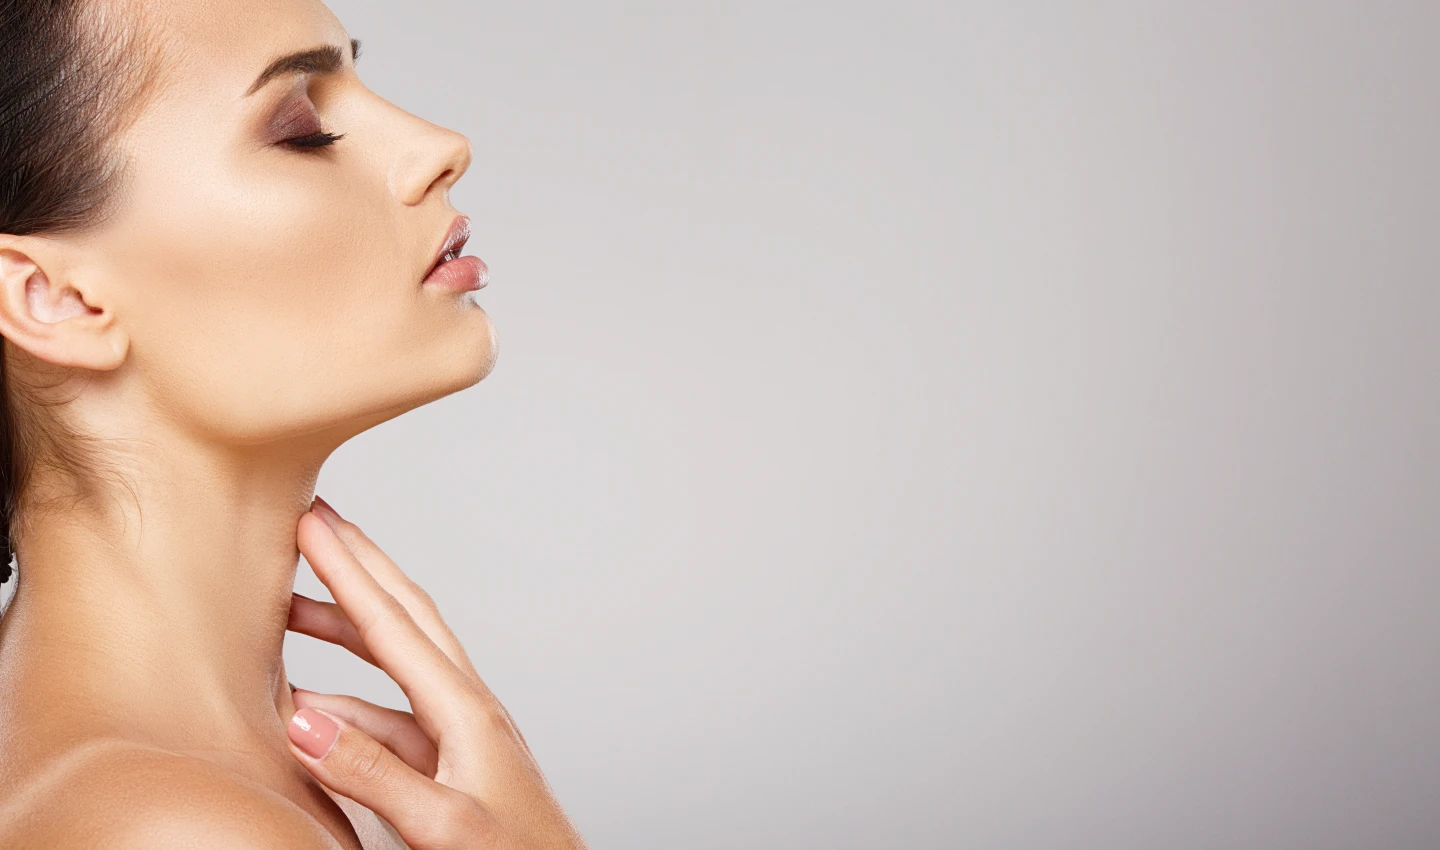 Image of a young woman with closed eyes, touching her neck and chin with her long, beautiful fingers. The image represents the natural beauty enhancements that can be achieved with Kybella, a non-surgical injectable treatment for reducing submental fat and enhancing the facial profile.